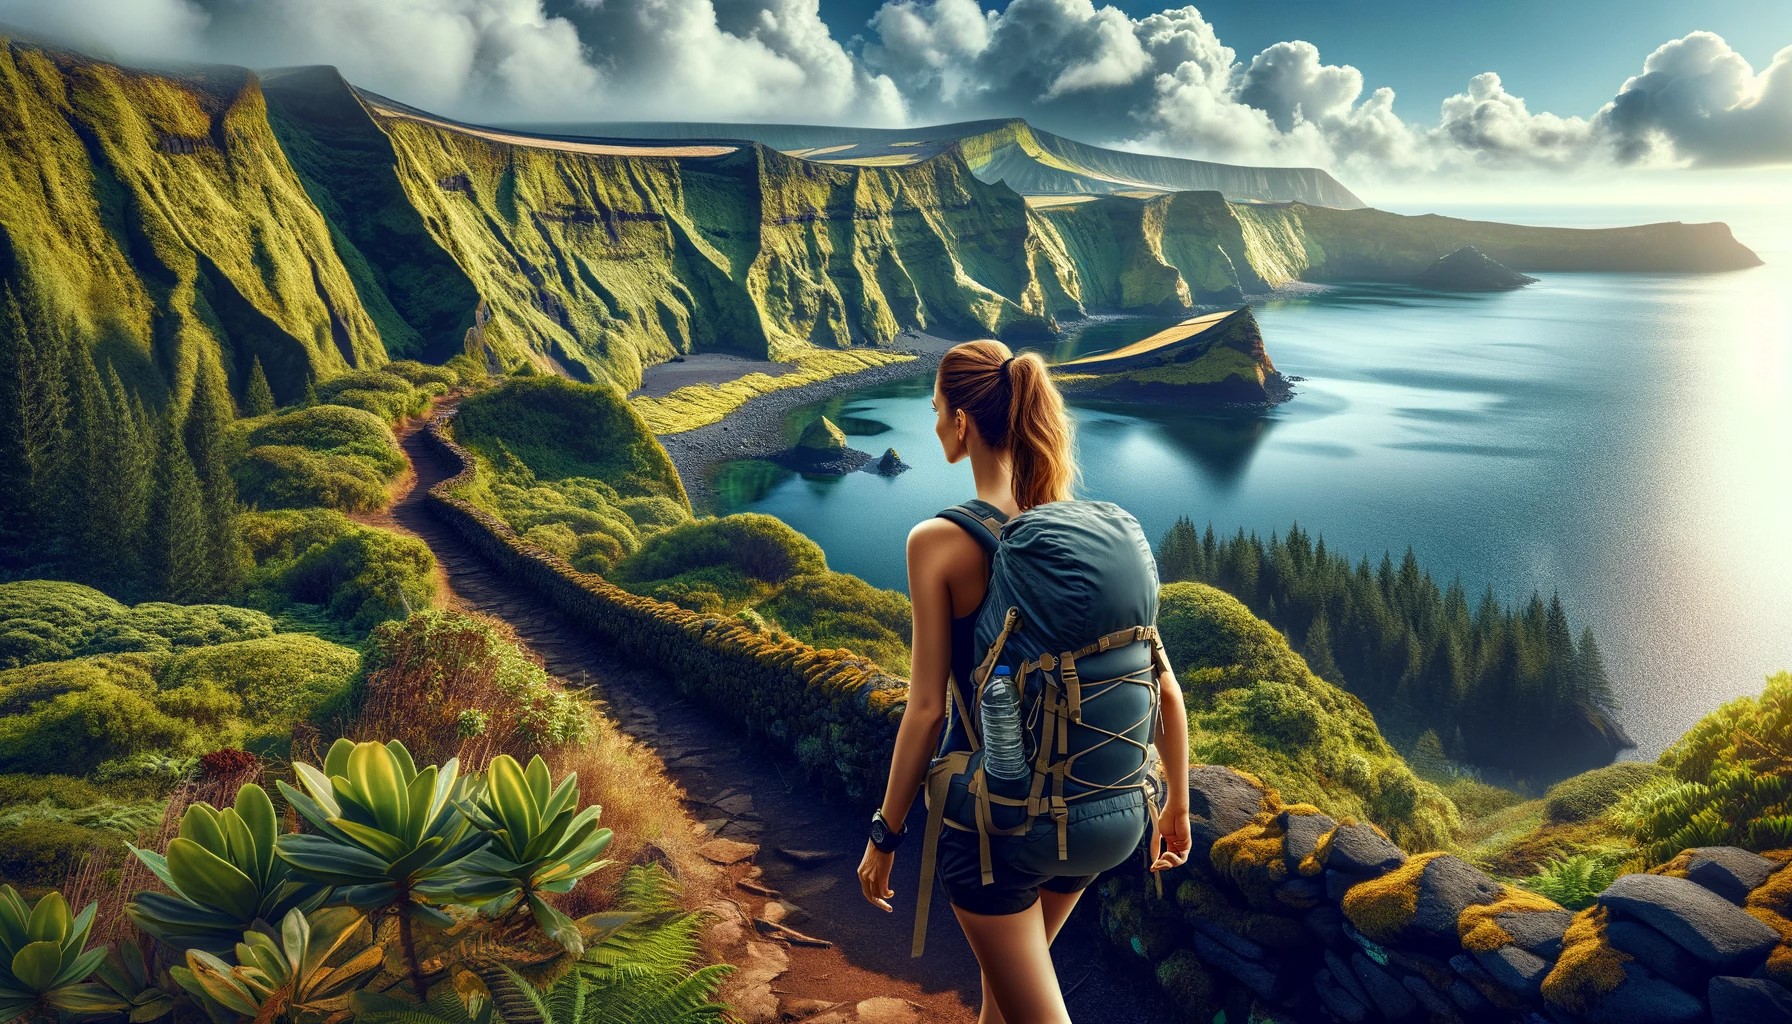 A female hiker exploring the volcanic landscapes of the Azores. She is wearing appropriate hiking attire and carrying a backpack, walking along a coas